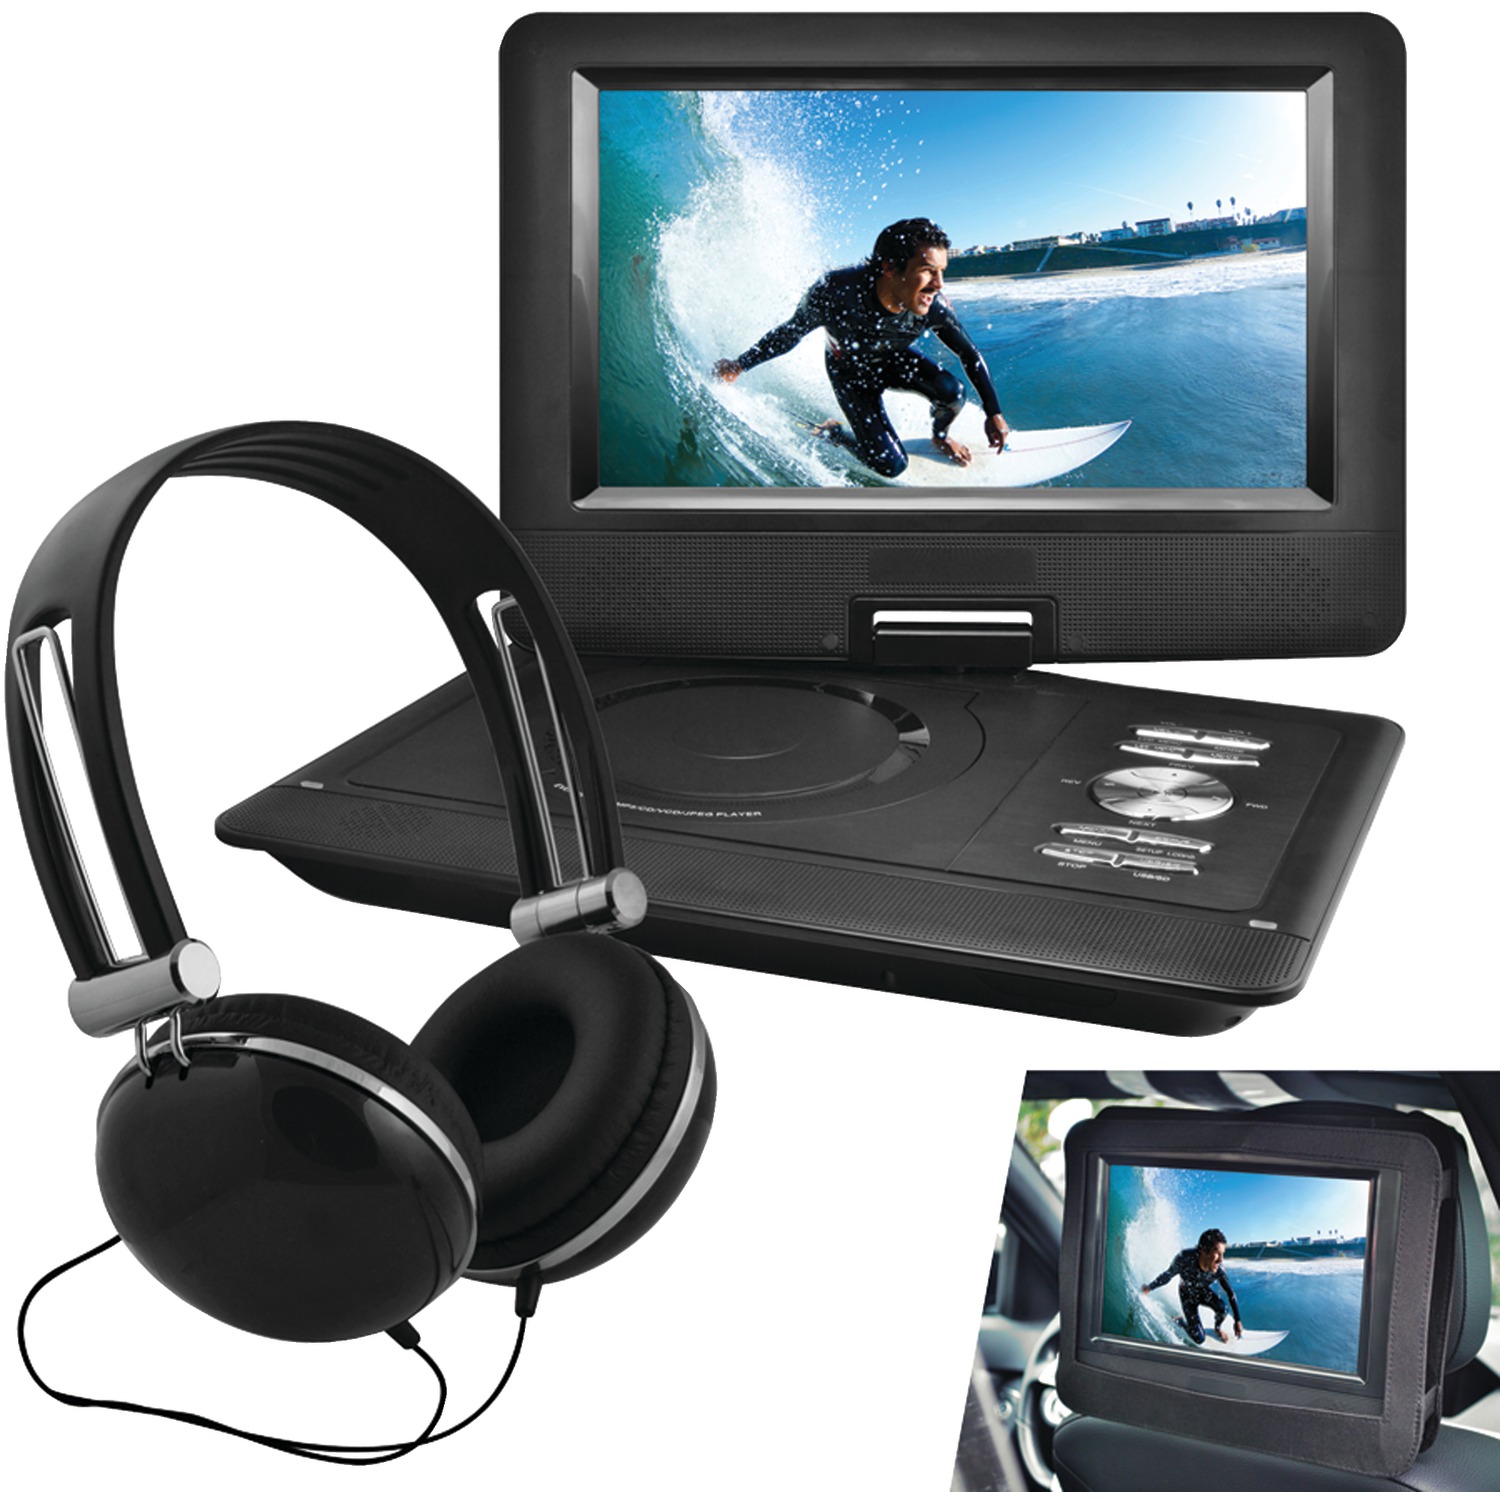 Ematic 10" Portable DVD Player with Headphones and Car-Headrest Mount - EPD116bl - image 1 of 6